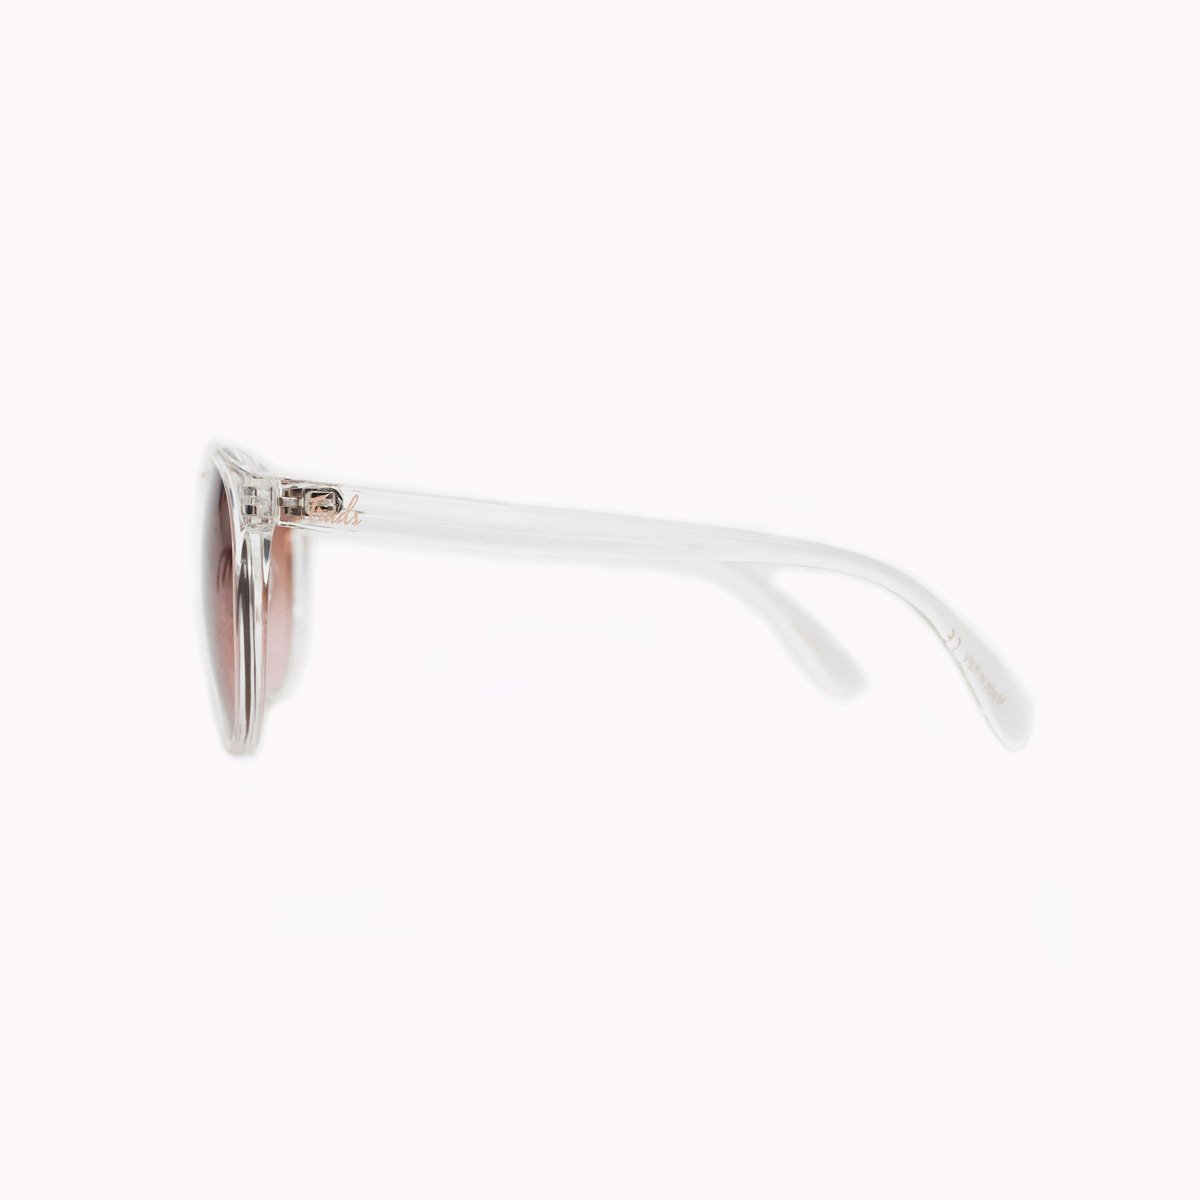 Womens sunglasses with a transparent frame that is handmade in Italy.